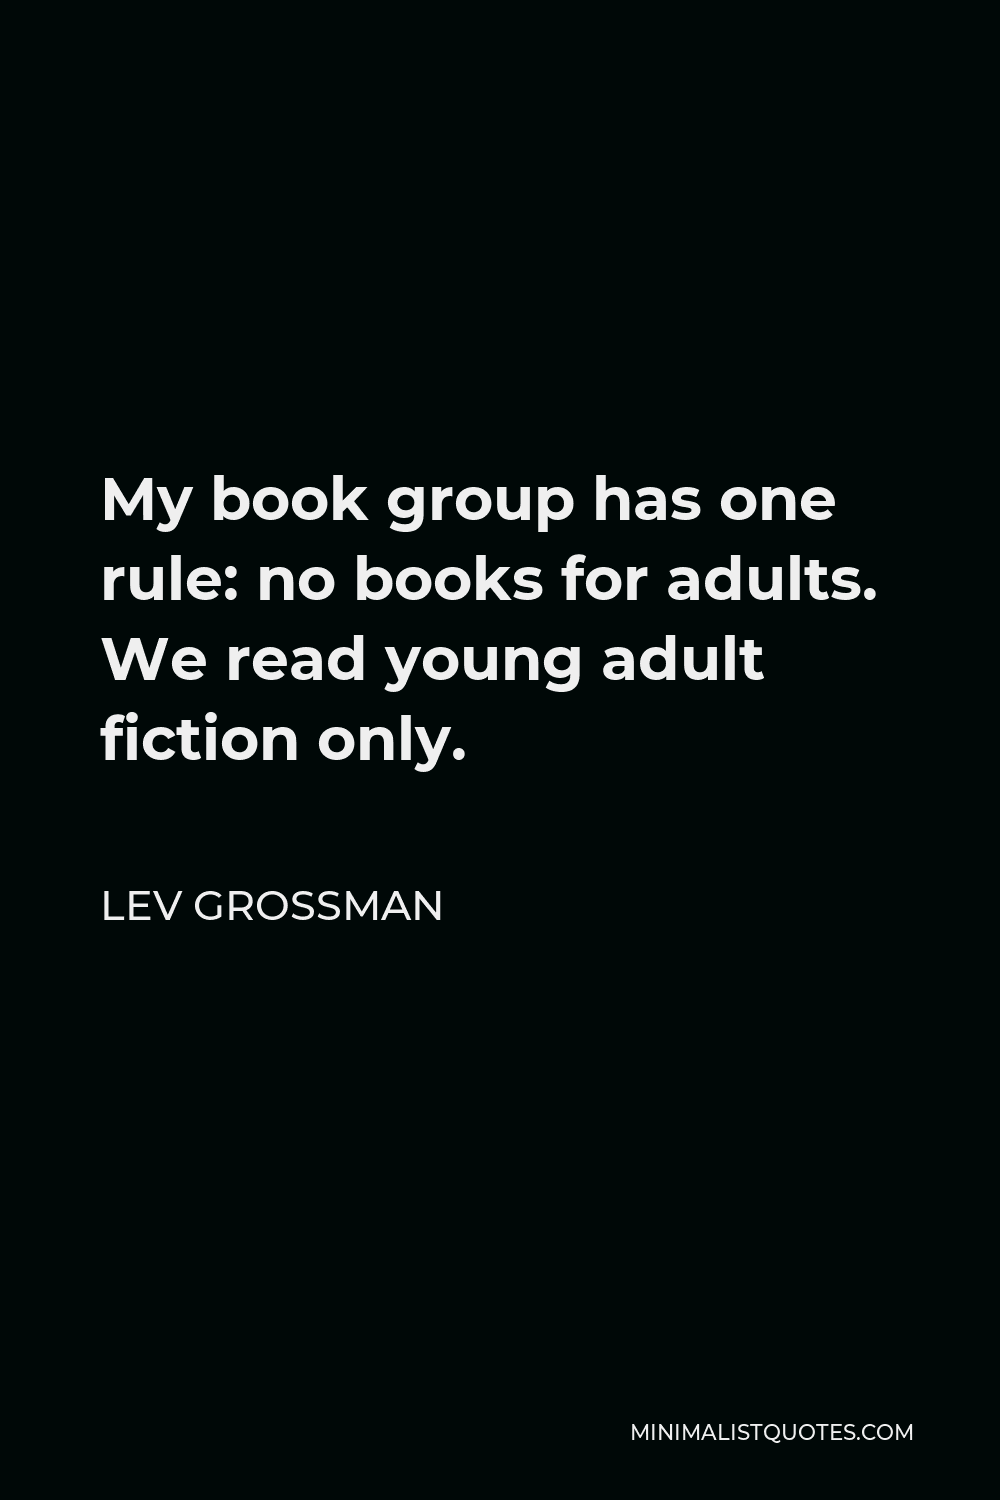 Lev Grossman Quote - My book group has one rule: no books for adults. We read young adult fiction only.